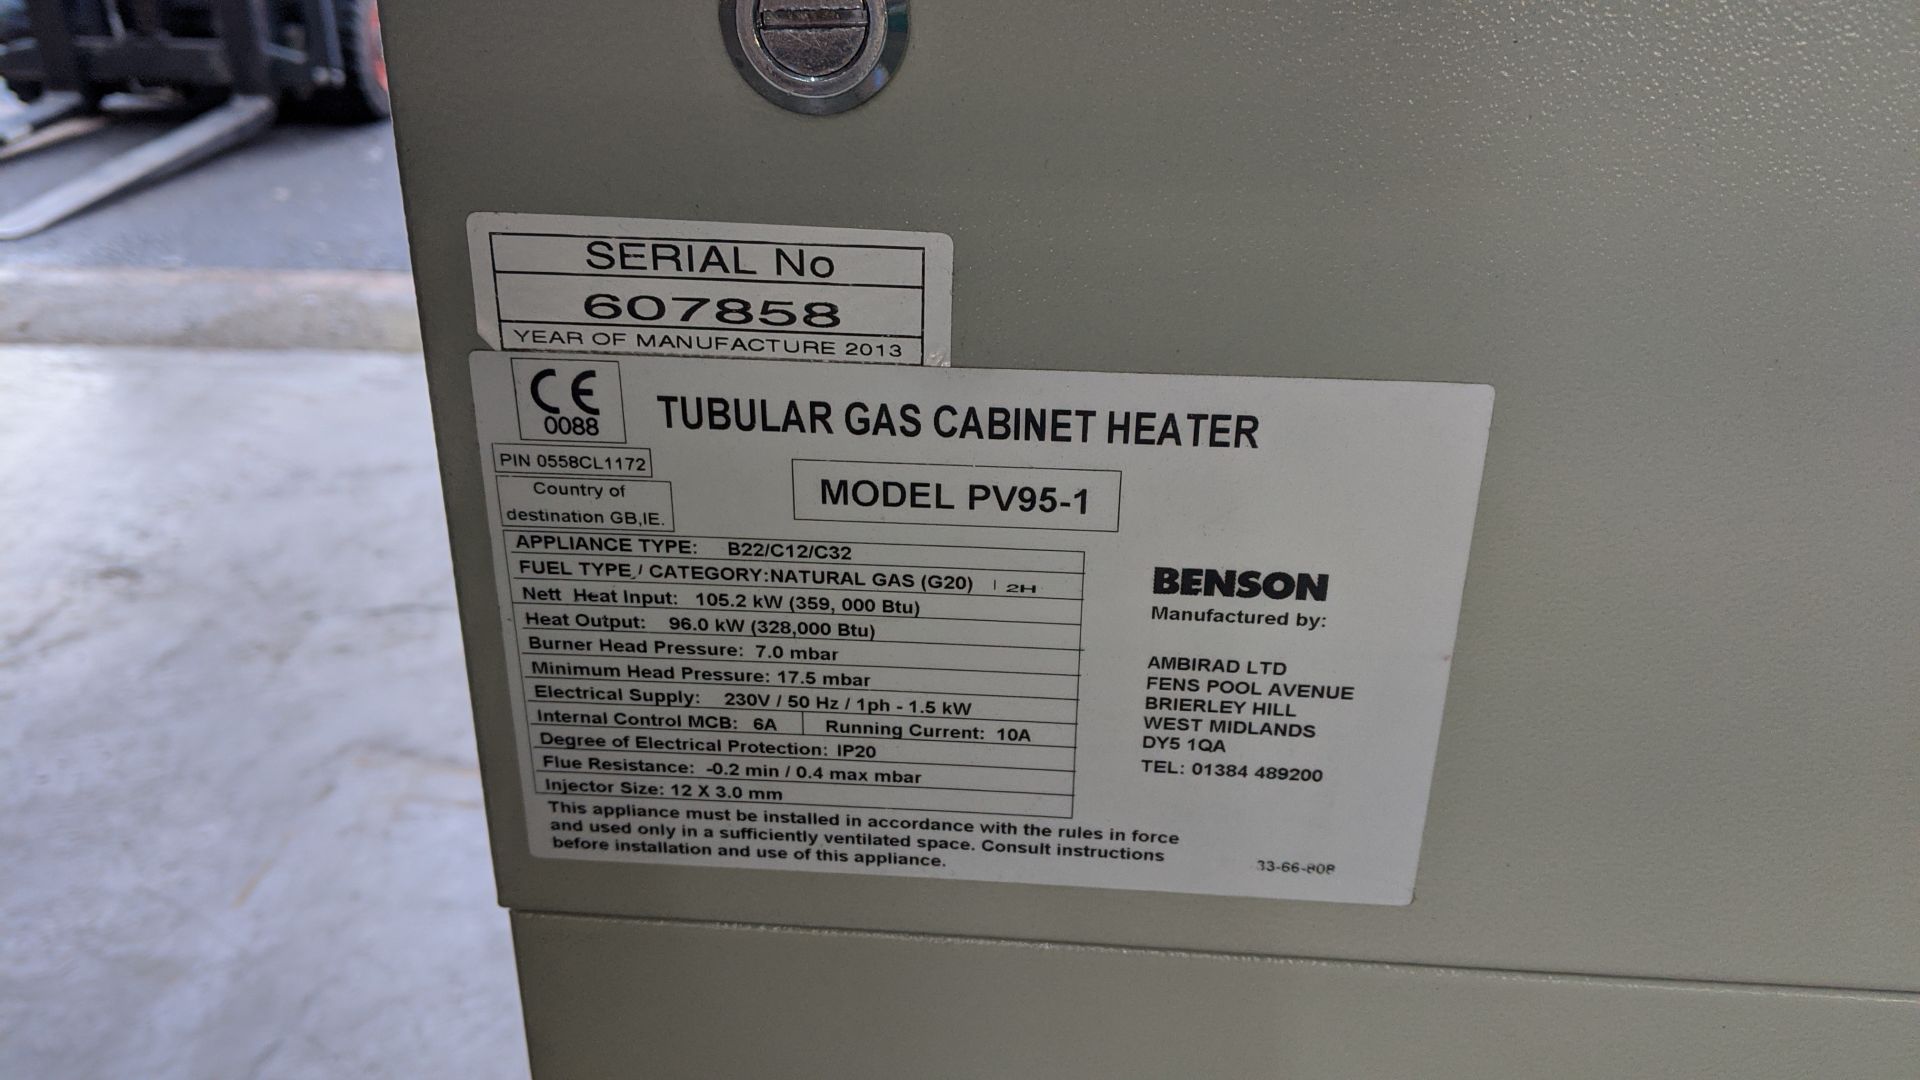 Benson tubular gas cabinet heater model PV95-1 serial no. 607858 with digital control panel. This - Image 13 of 17